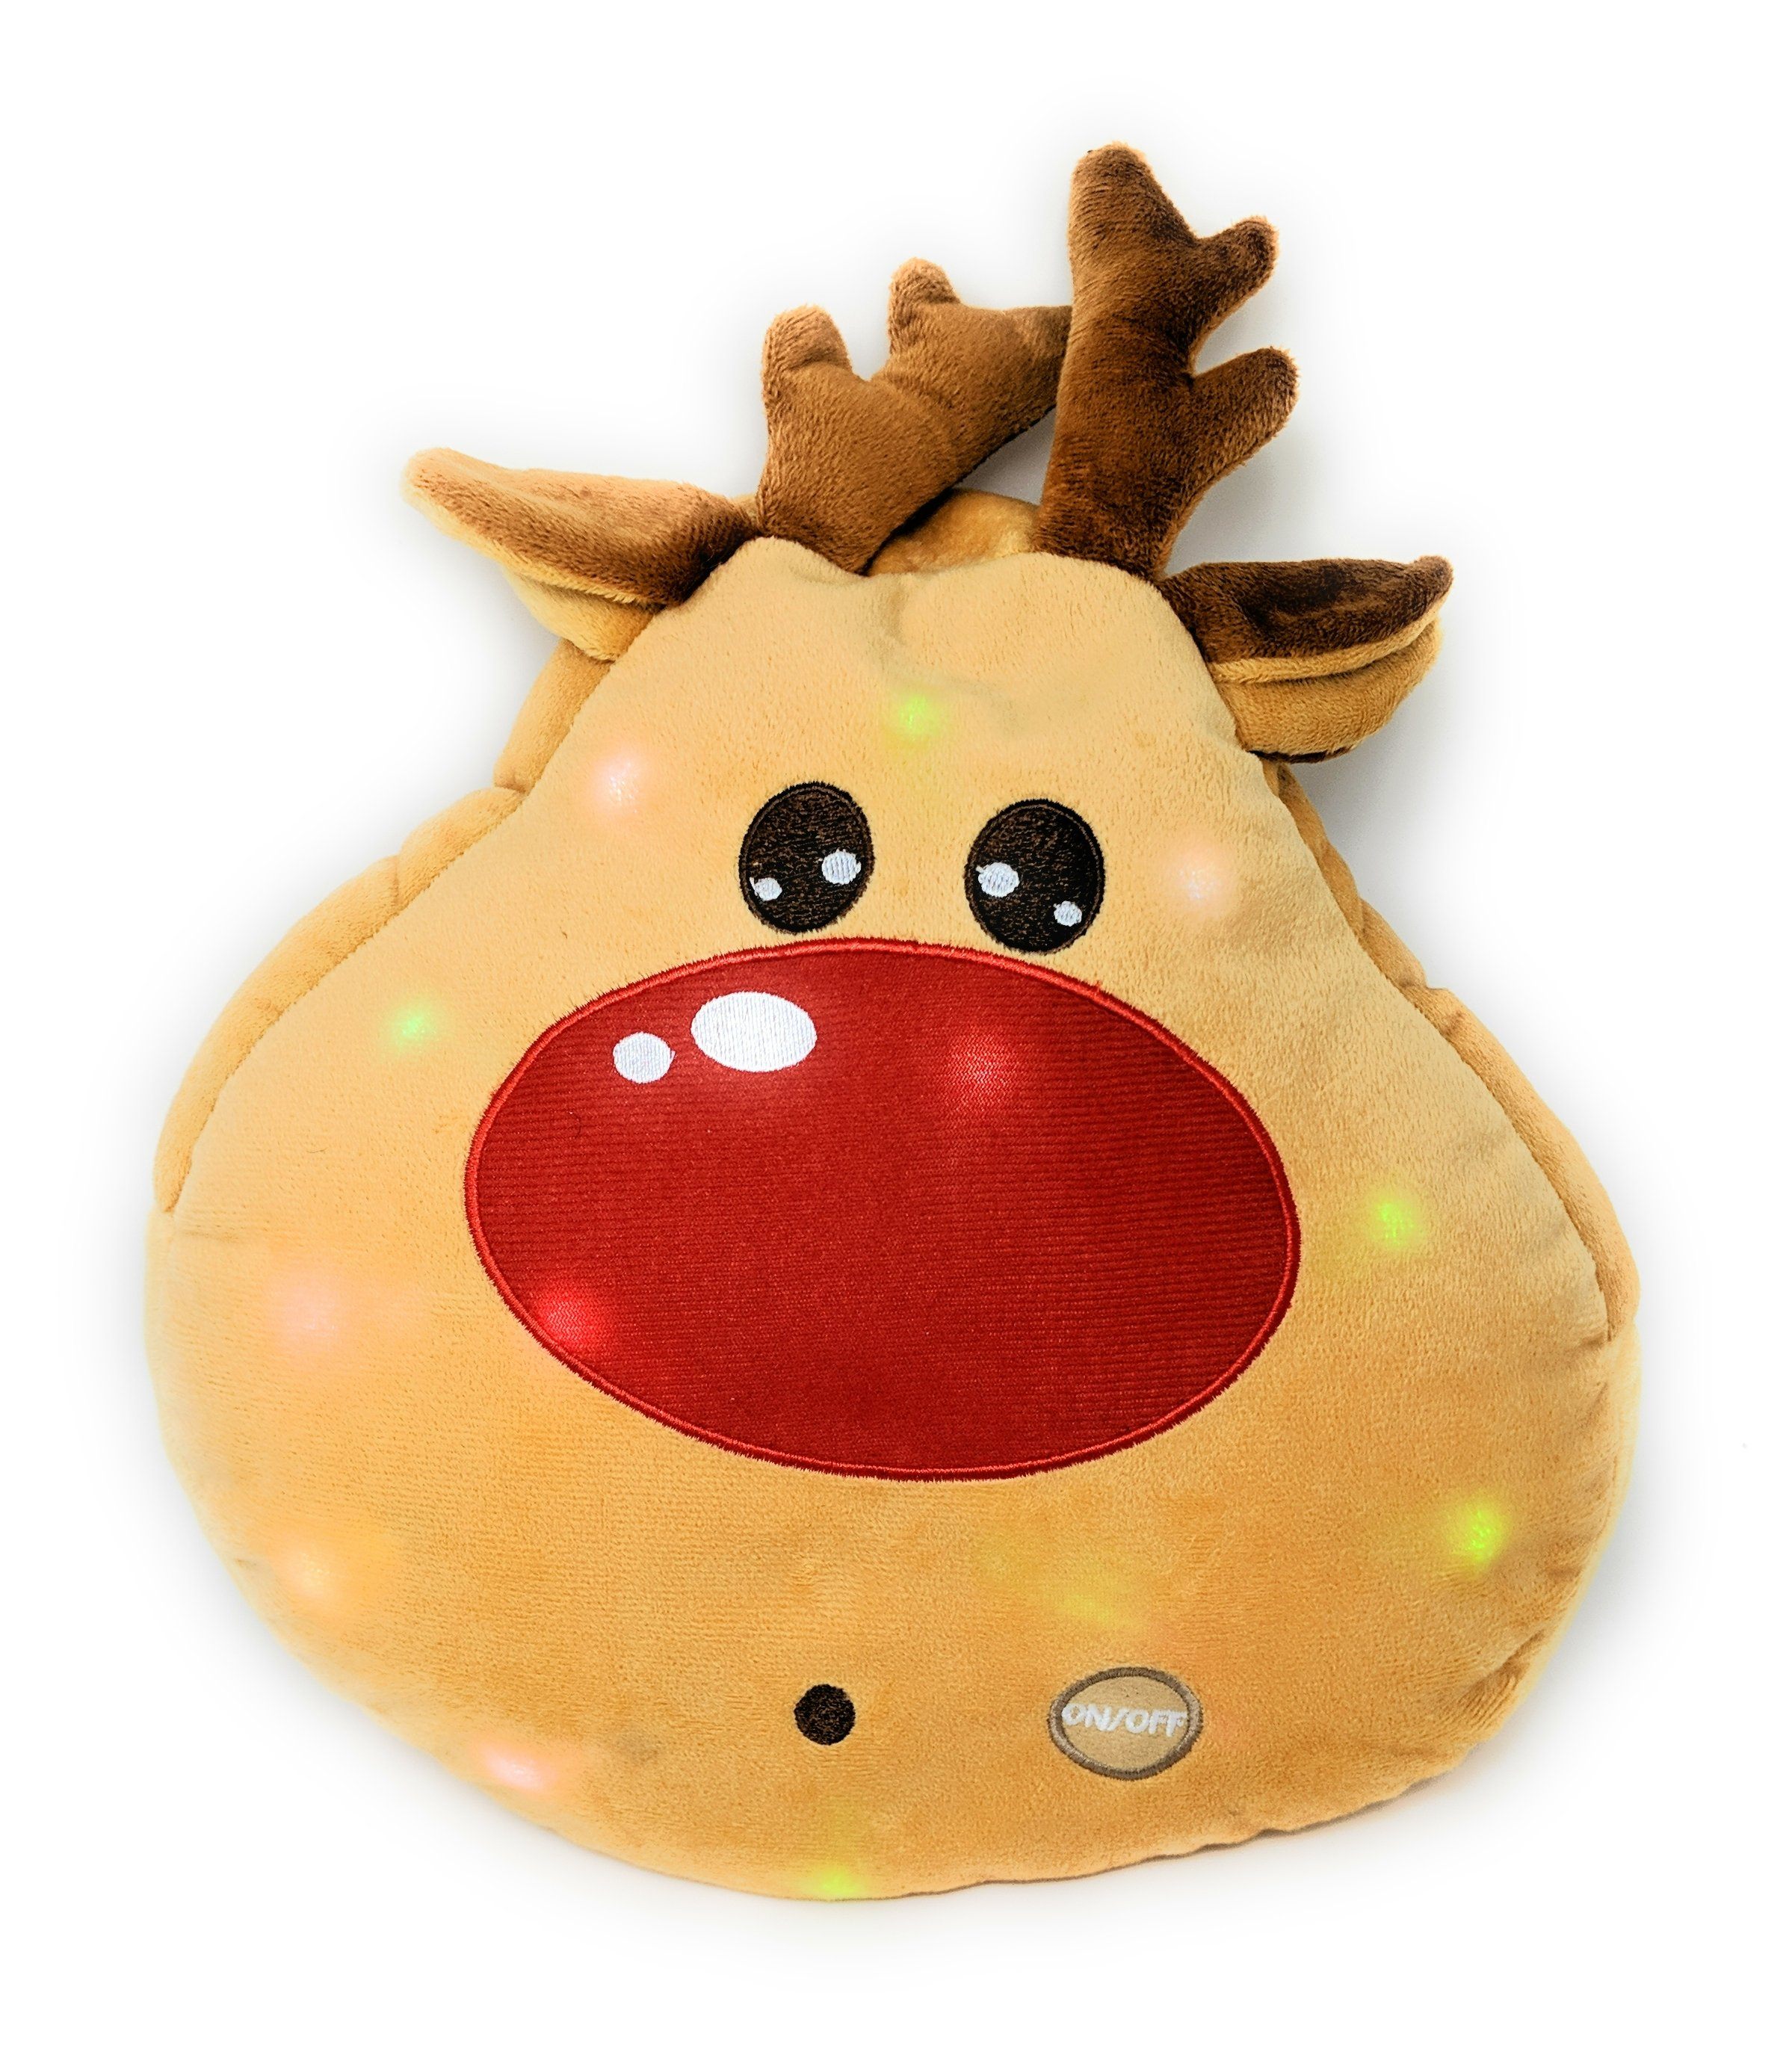 Tache Glowing Lightup Christmas Lights Festive Light Up Squishy Plush Reindeer Pillow Cushion Toy Doll With LED